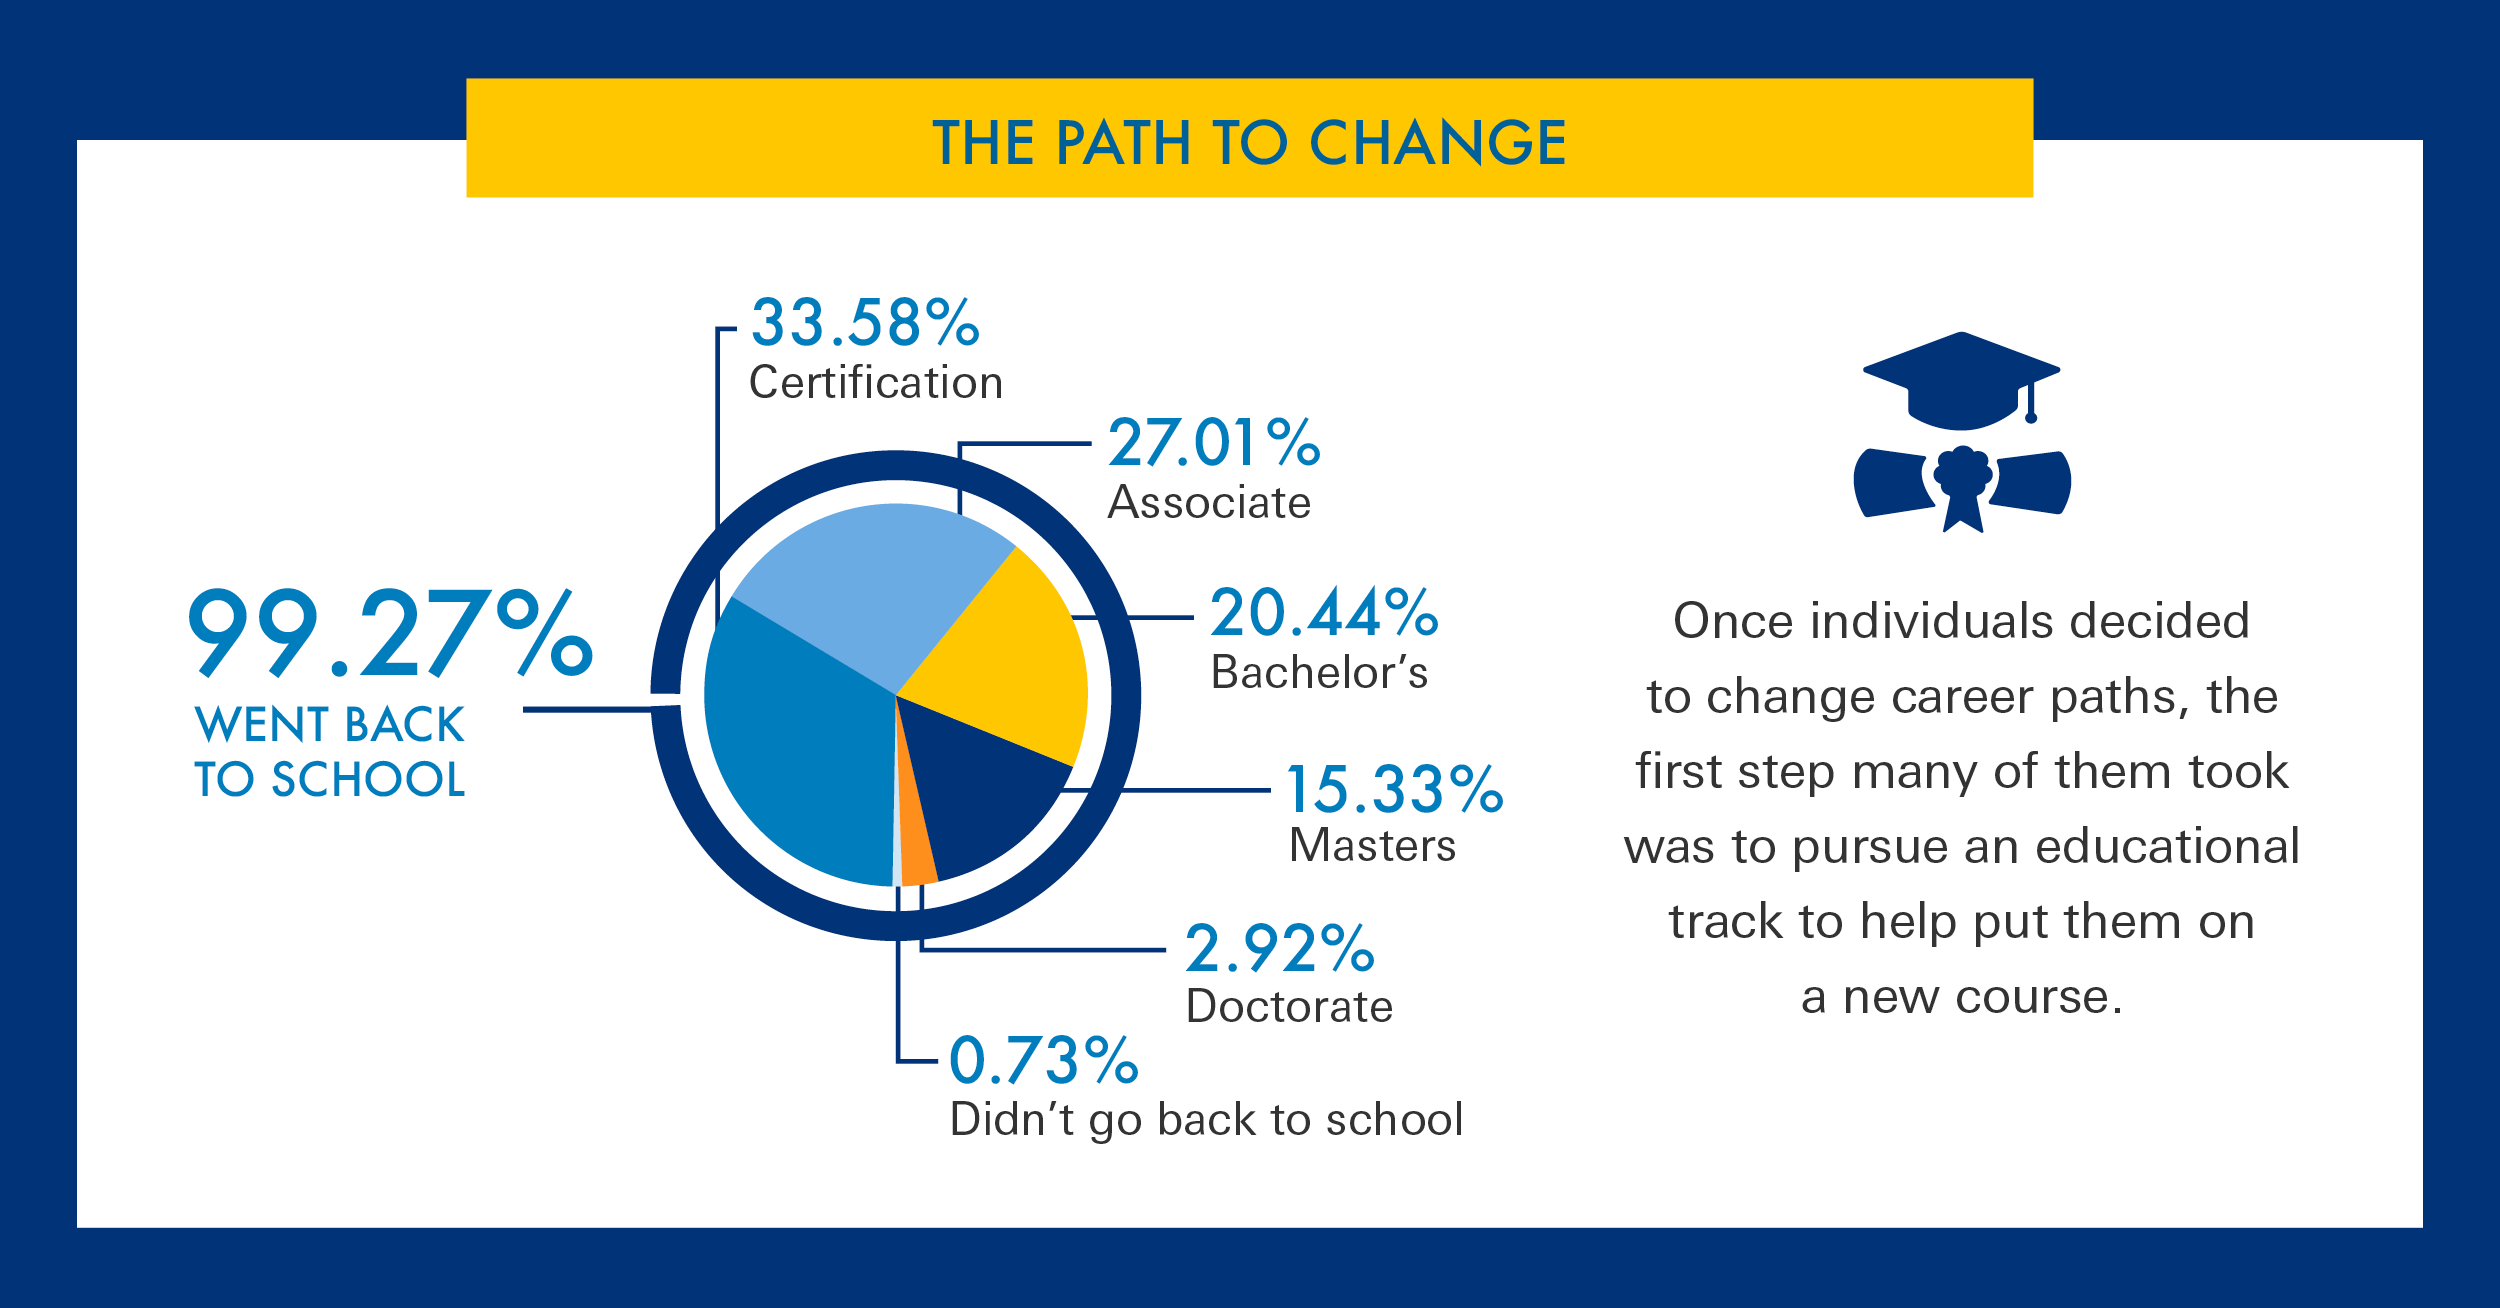 The path to change – 99.27% went back to school